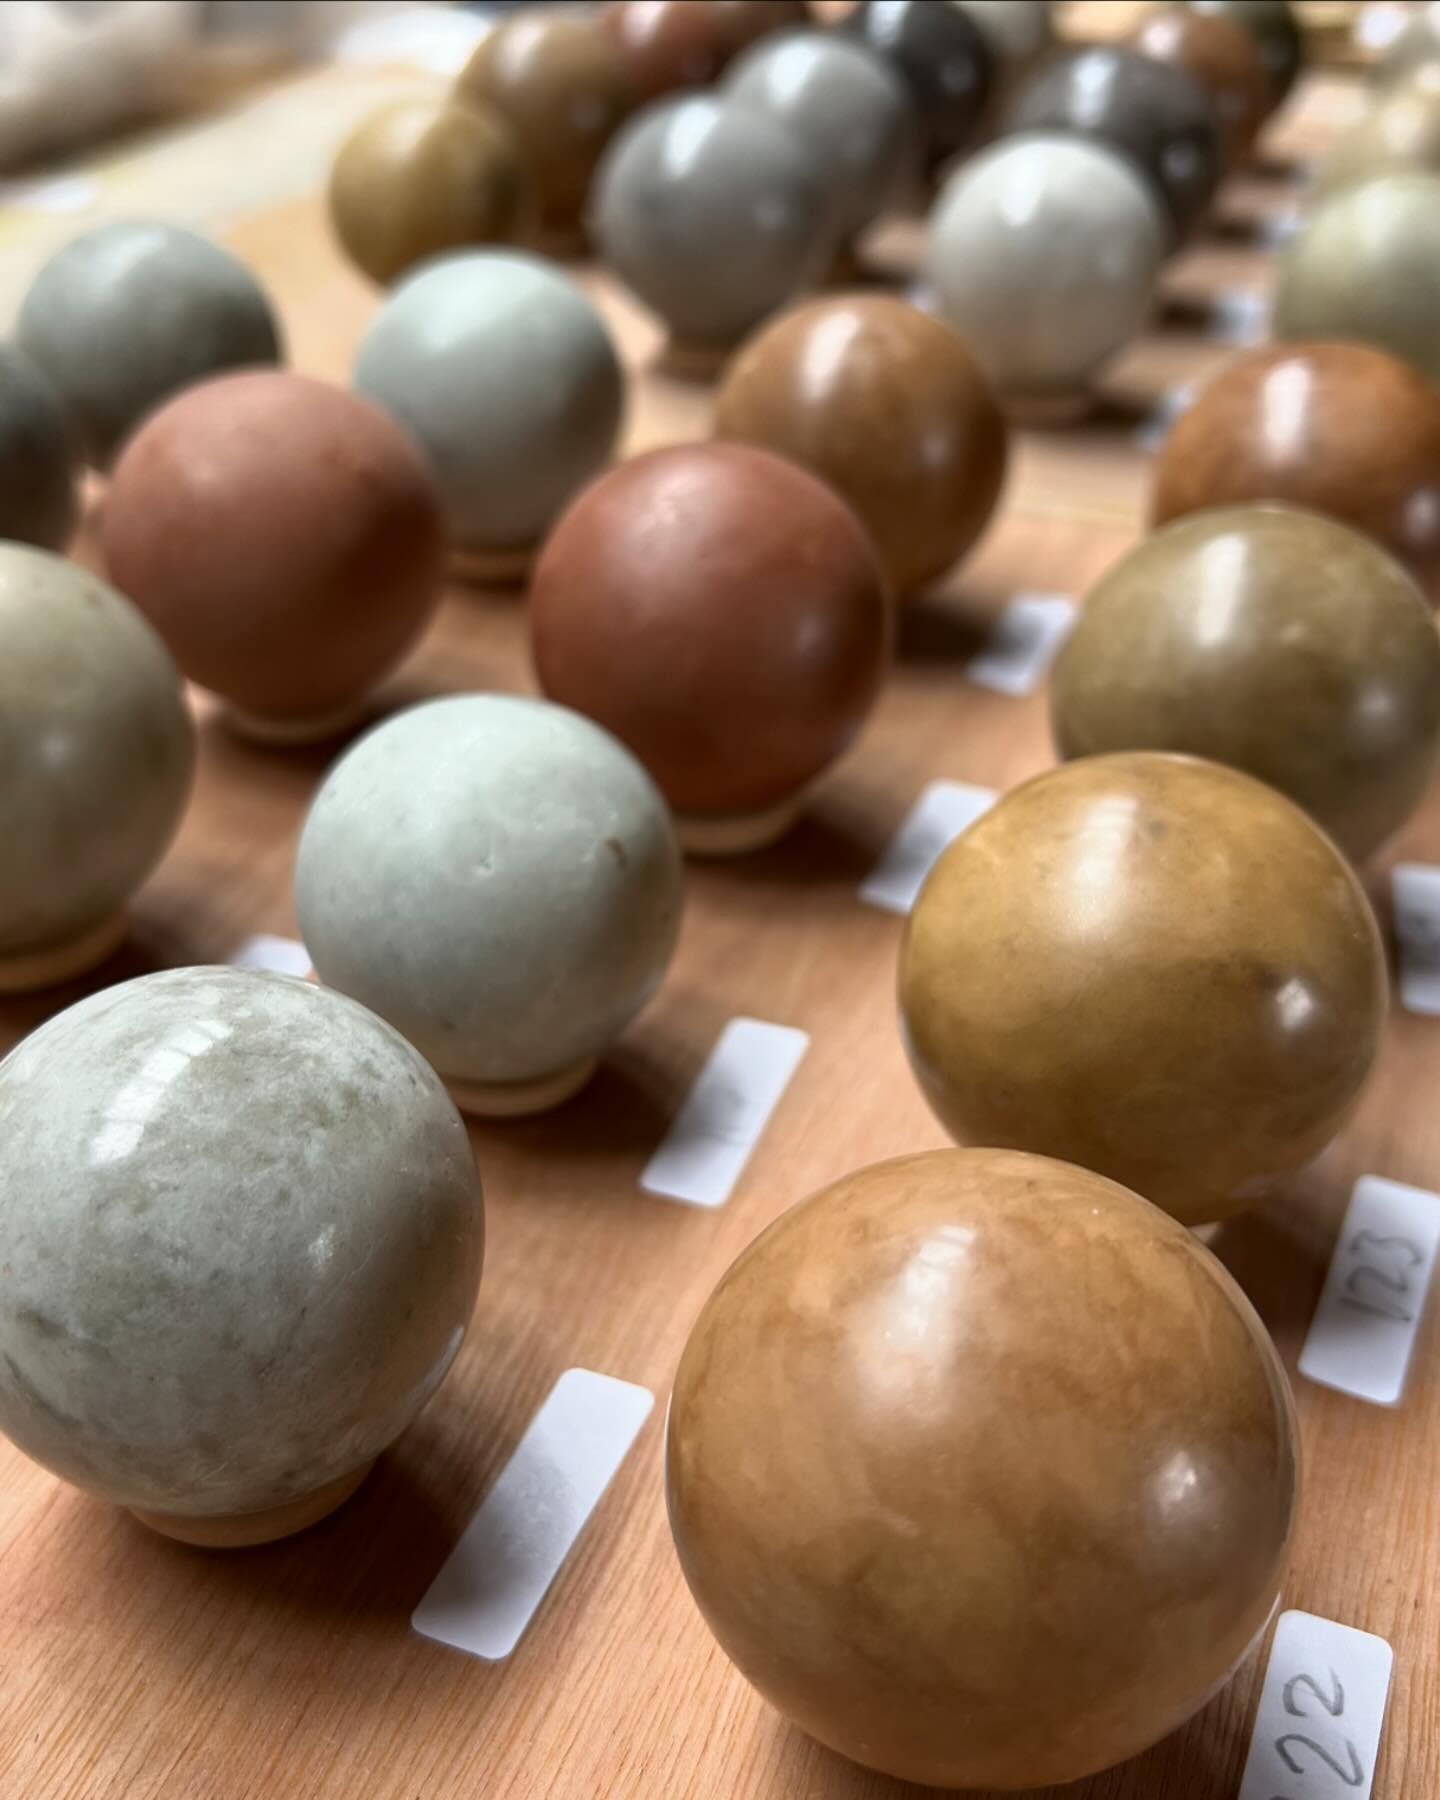 Earthbound Orkney. It all began with a shiny clay ball made from the spoil heap at the Ness of Brodgar. Soil samples as art, treasure from dirt. 

Researching the use of subsoils in prehistoric Orkney. 

#macontemporaryartandarchaeology 
#dorodango #